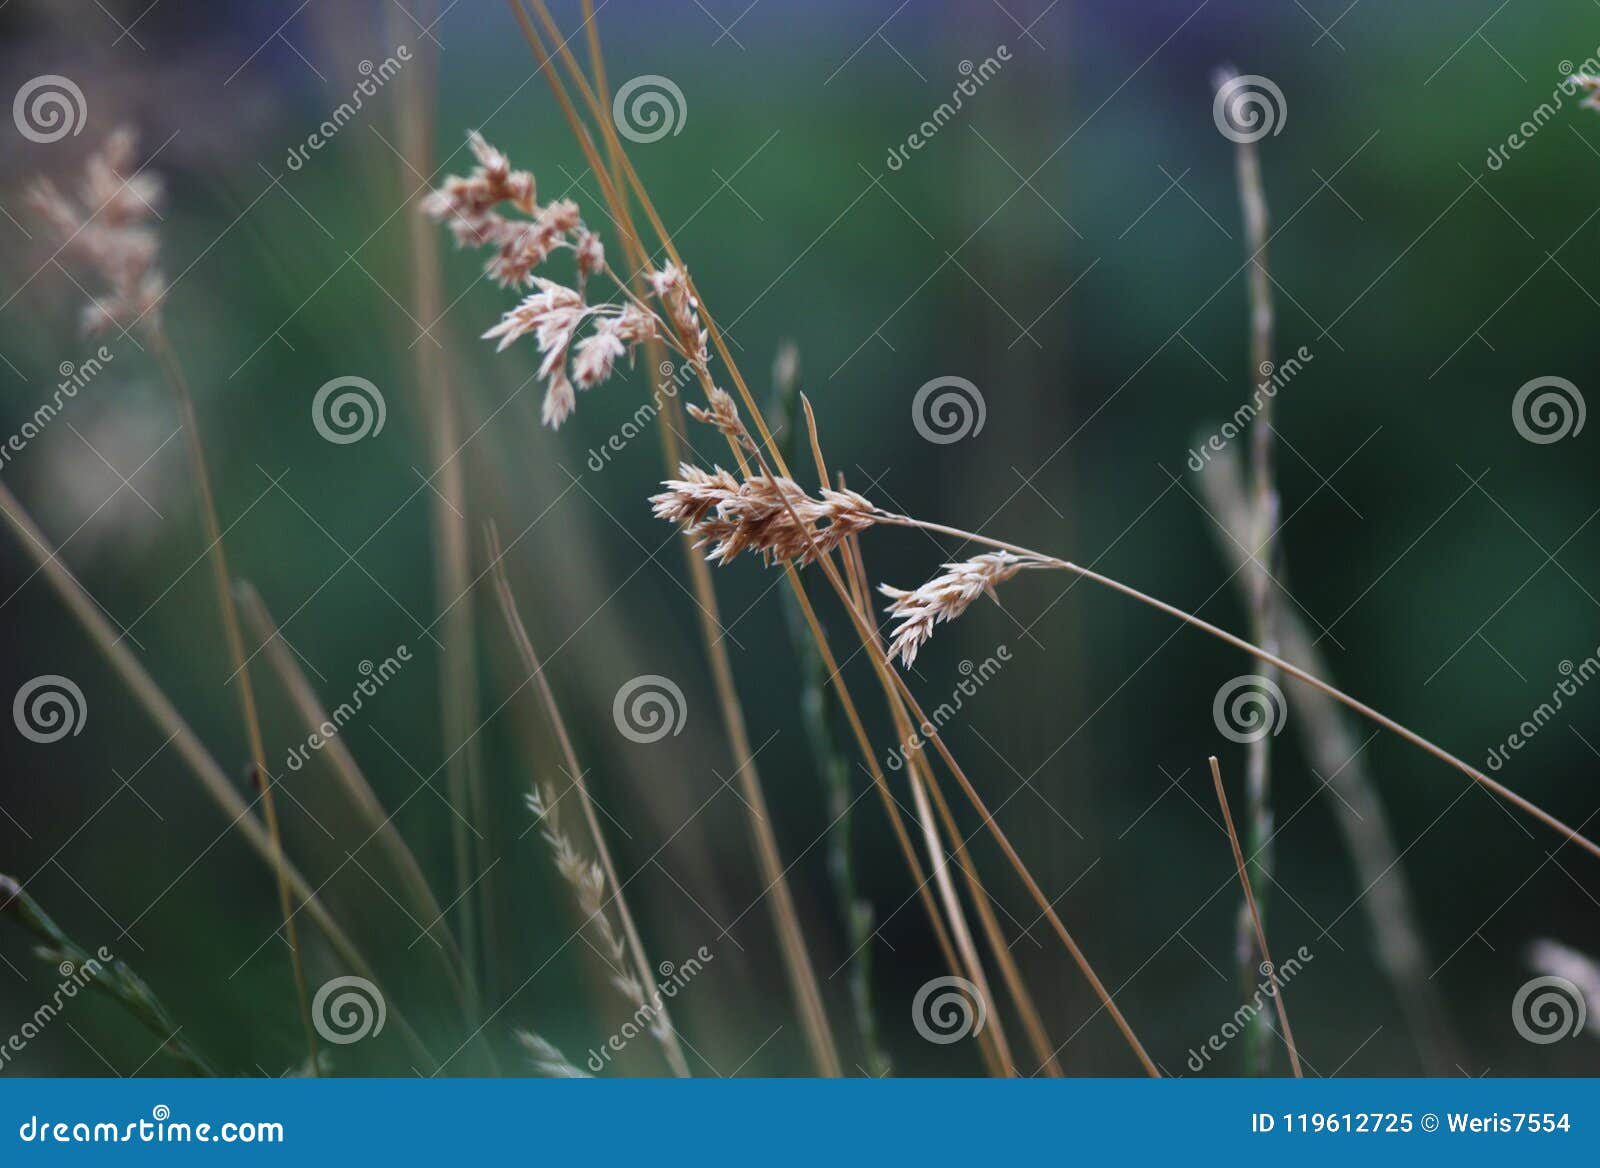 beautiful dry grass close-up macro against a strongly unfocused background. nature, art photo for poster.